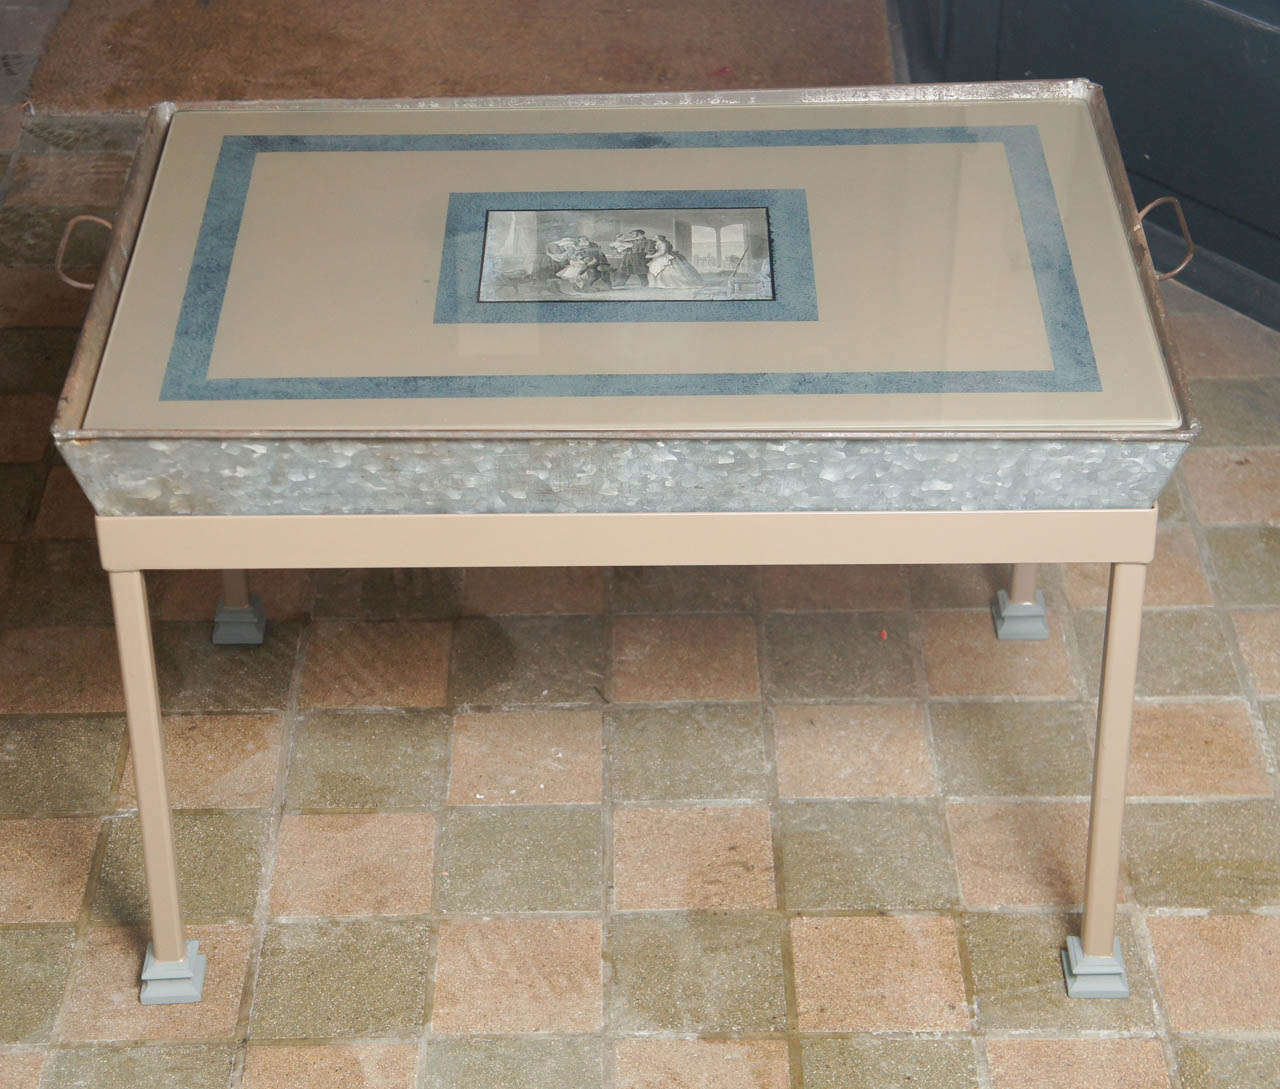 This fun old table made in the 40's shows a talented and crafty hand at work creating a one of a kind small cocktail table. The tray is a nice old galvanized  metal with all its surface in place the glass top made for it is decopaged with a 19th